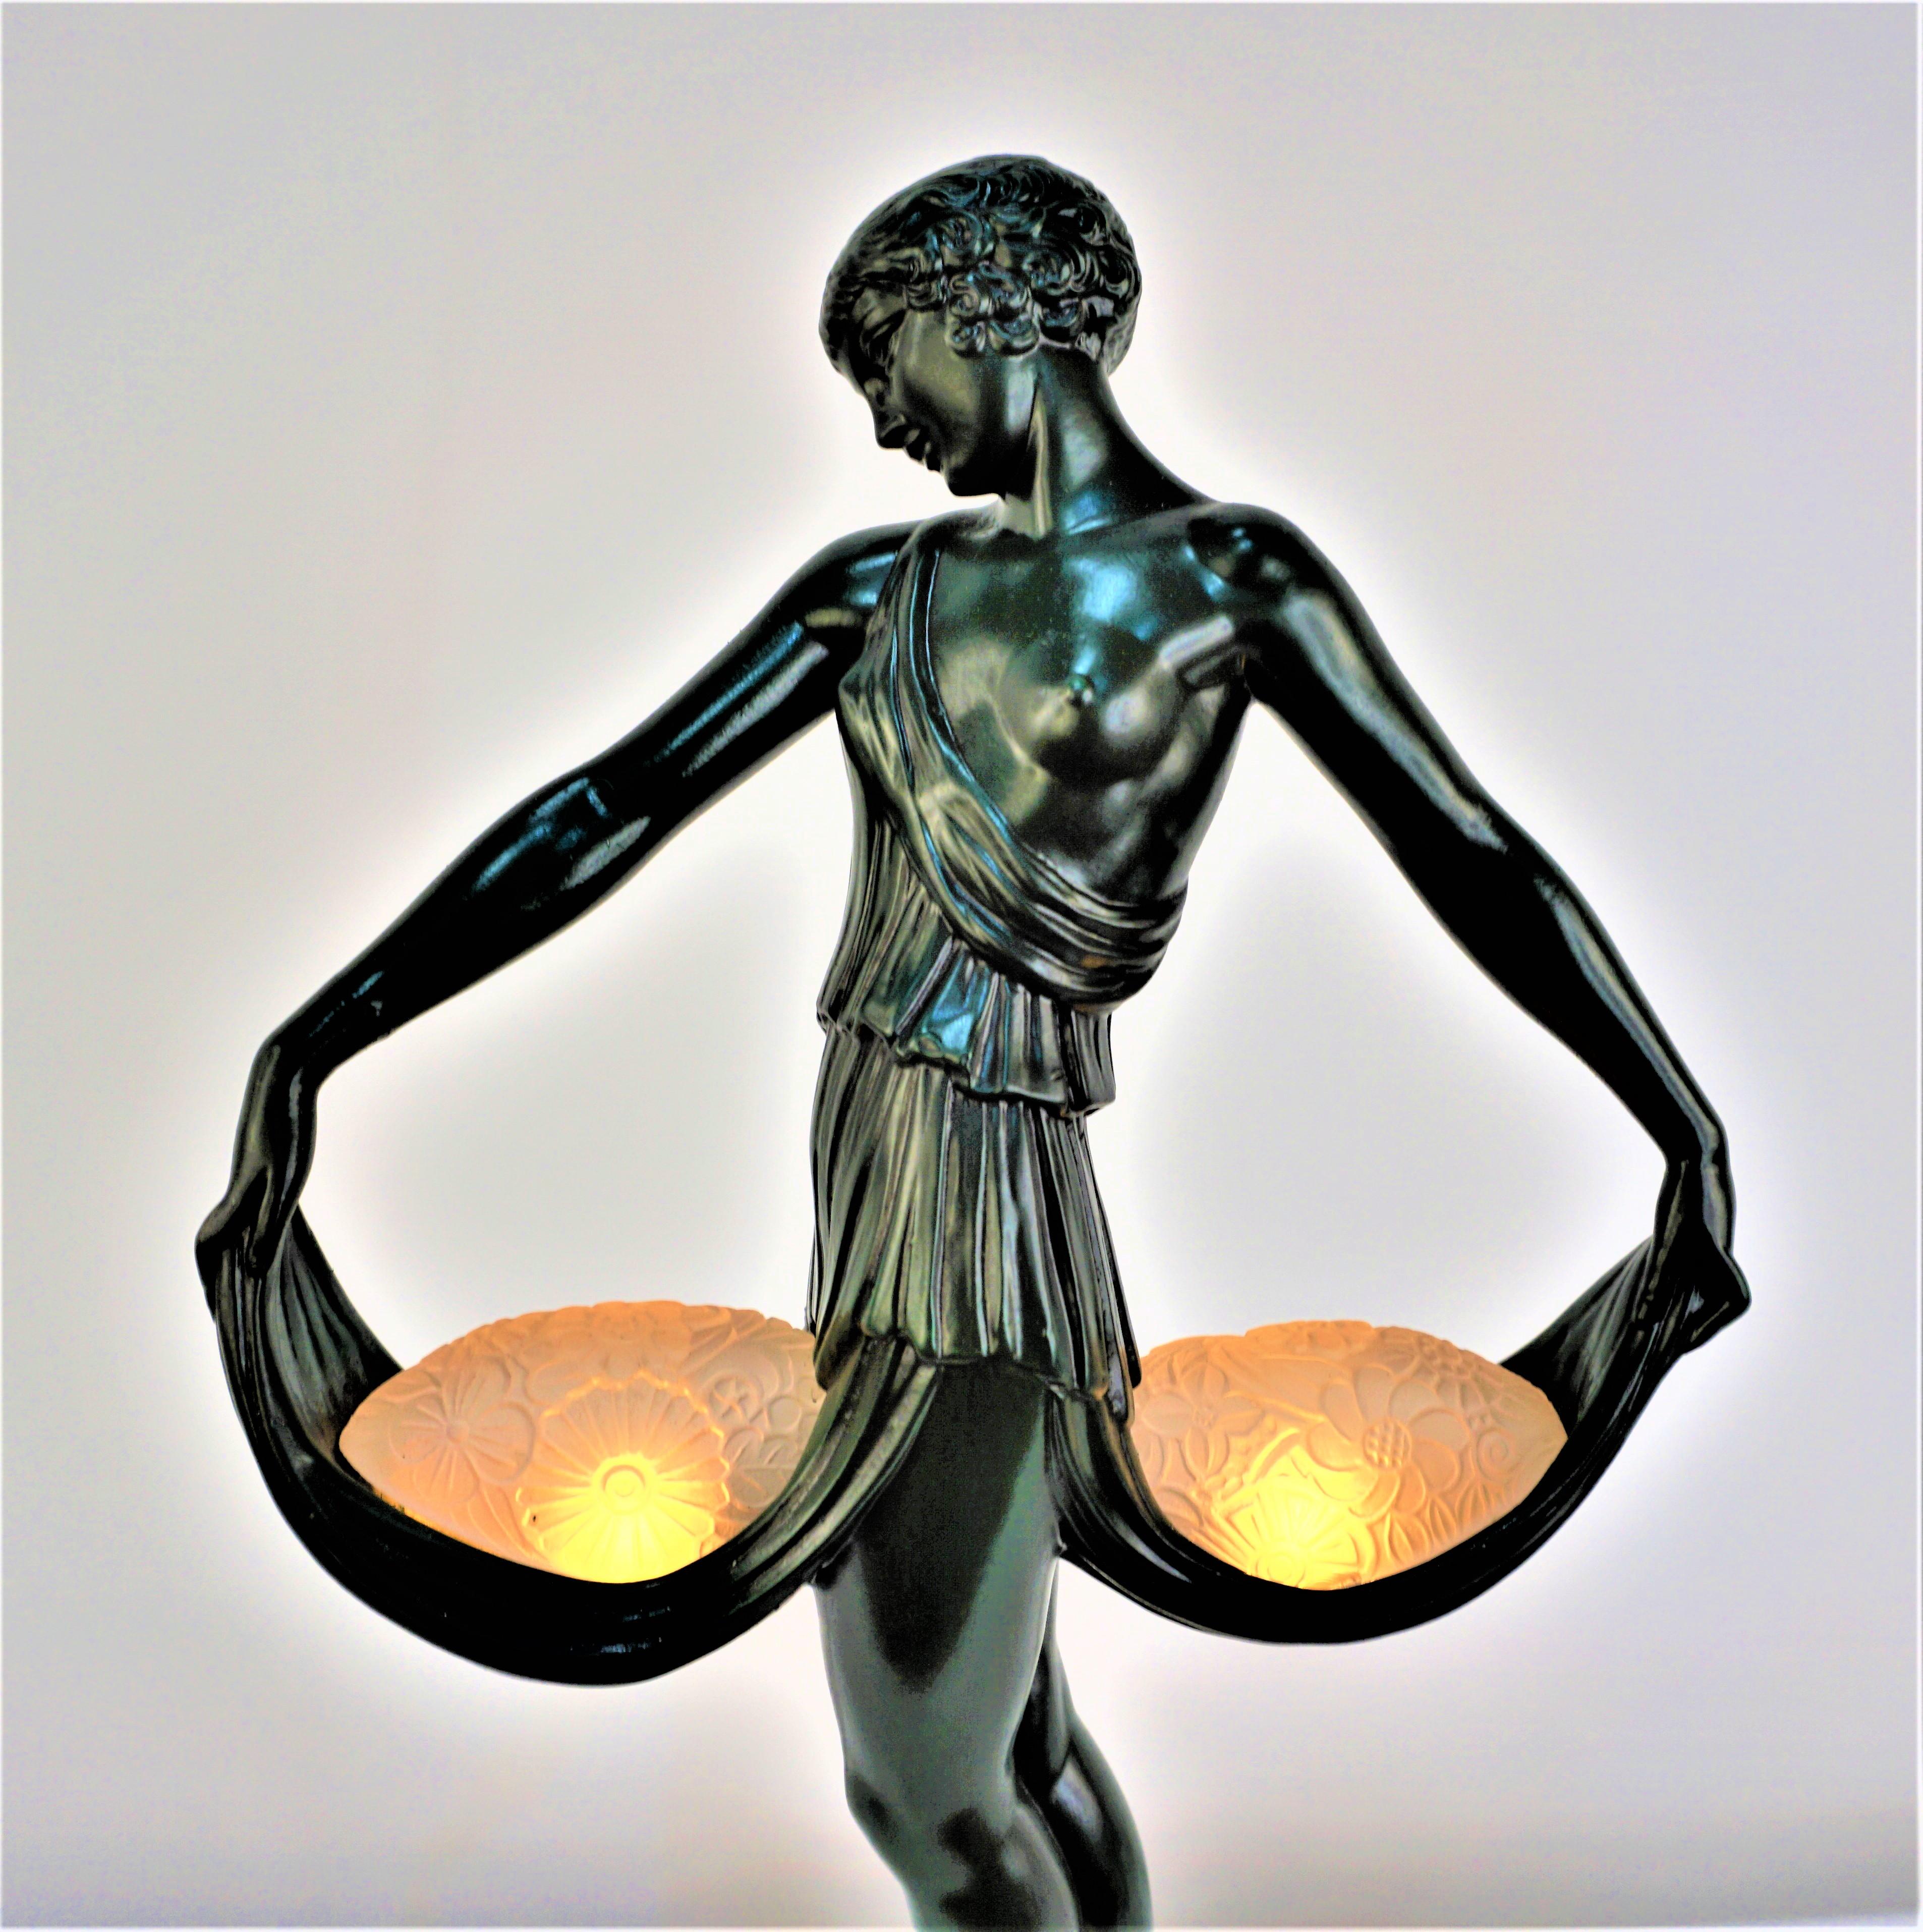 Very rare art deco sculpture table lamp two flower glass shade with light under placed on her front and back skirt hold up by her hands. 
Signed Fayral(Pierre Le Faguays) with Paris Verrier foundry mark.